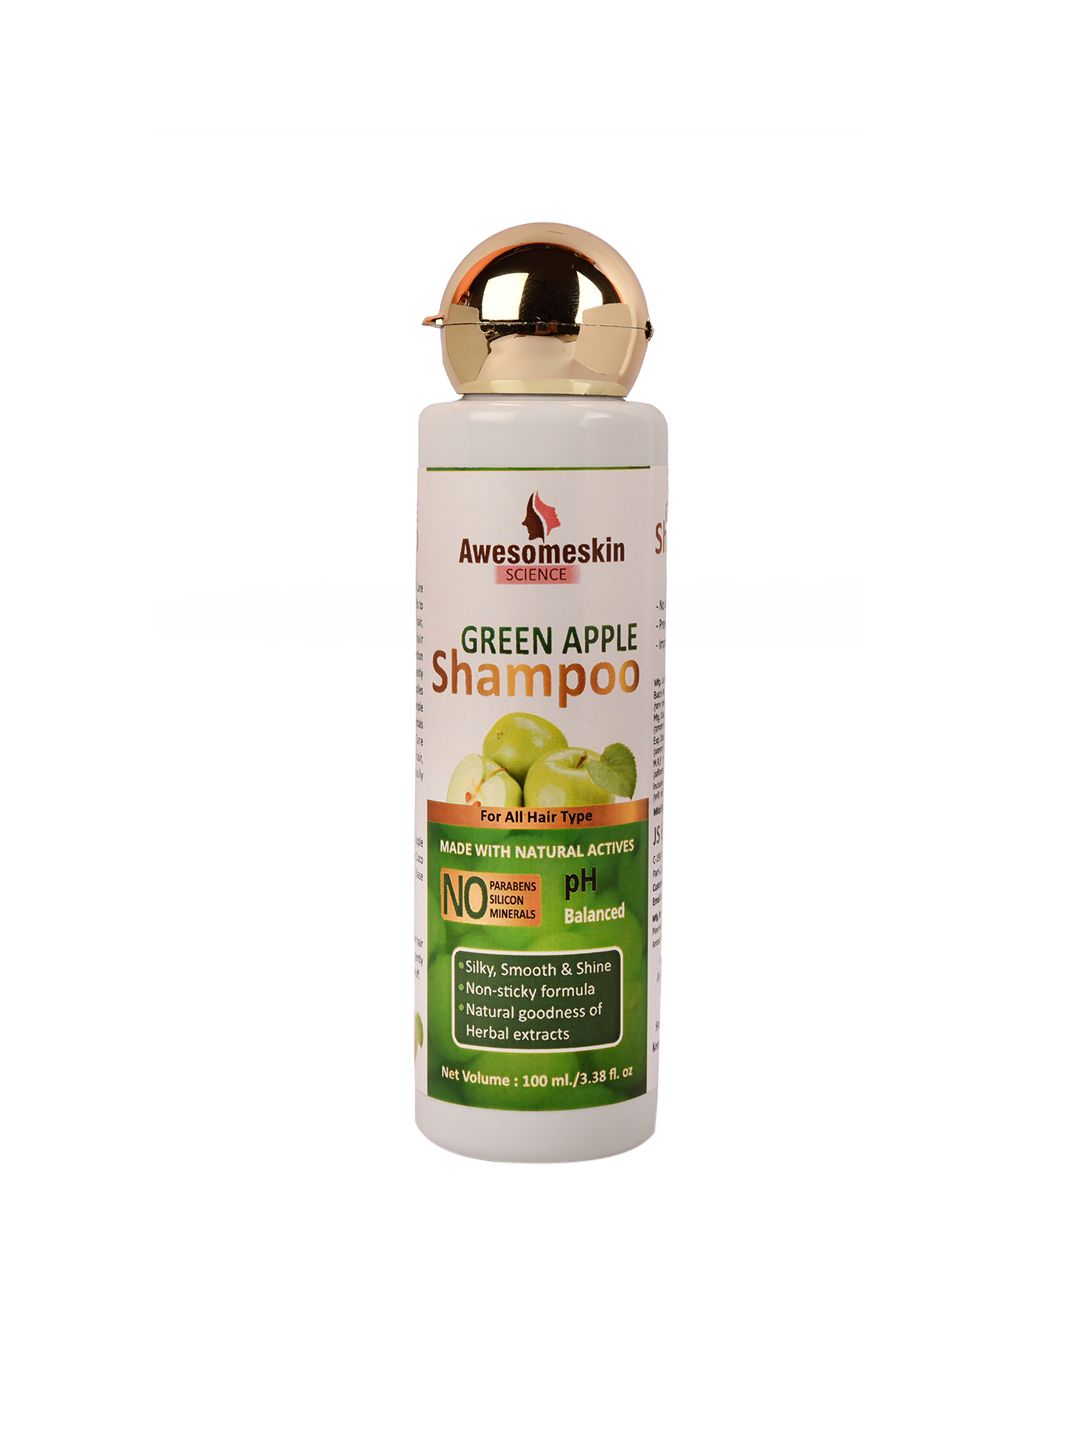 Awesomeskin Science Green Apple Shampoo for All Hair Type - 100 ml Price in India